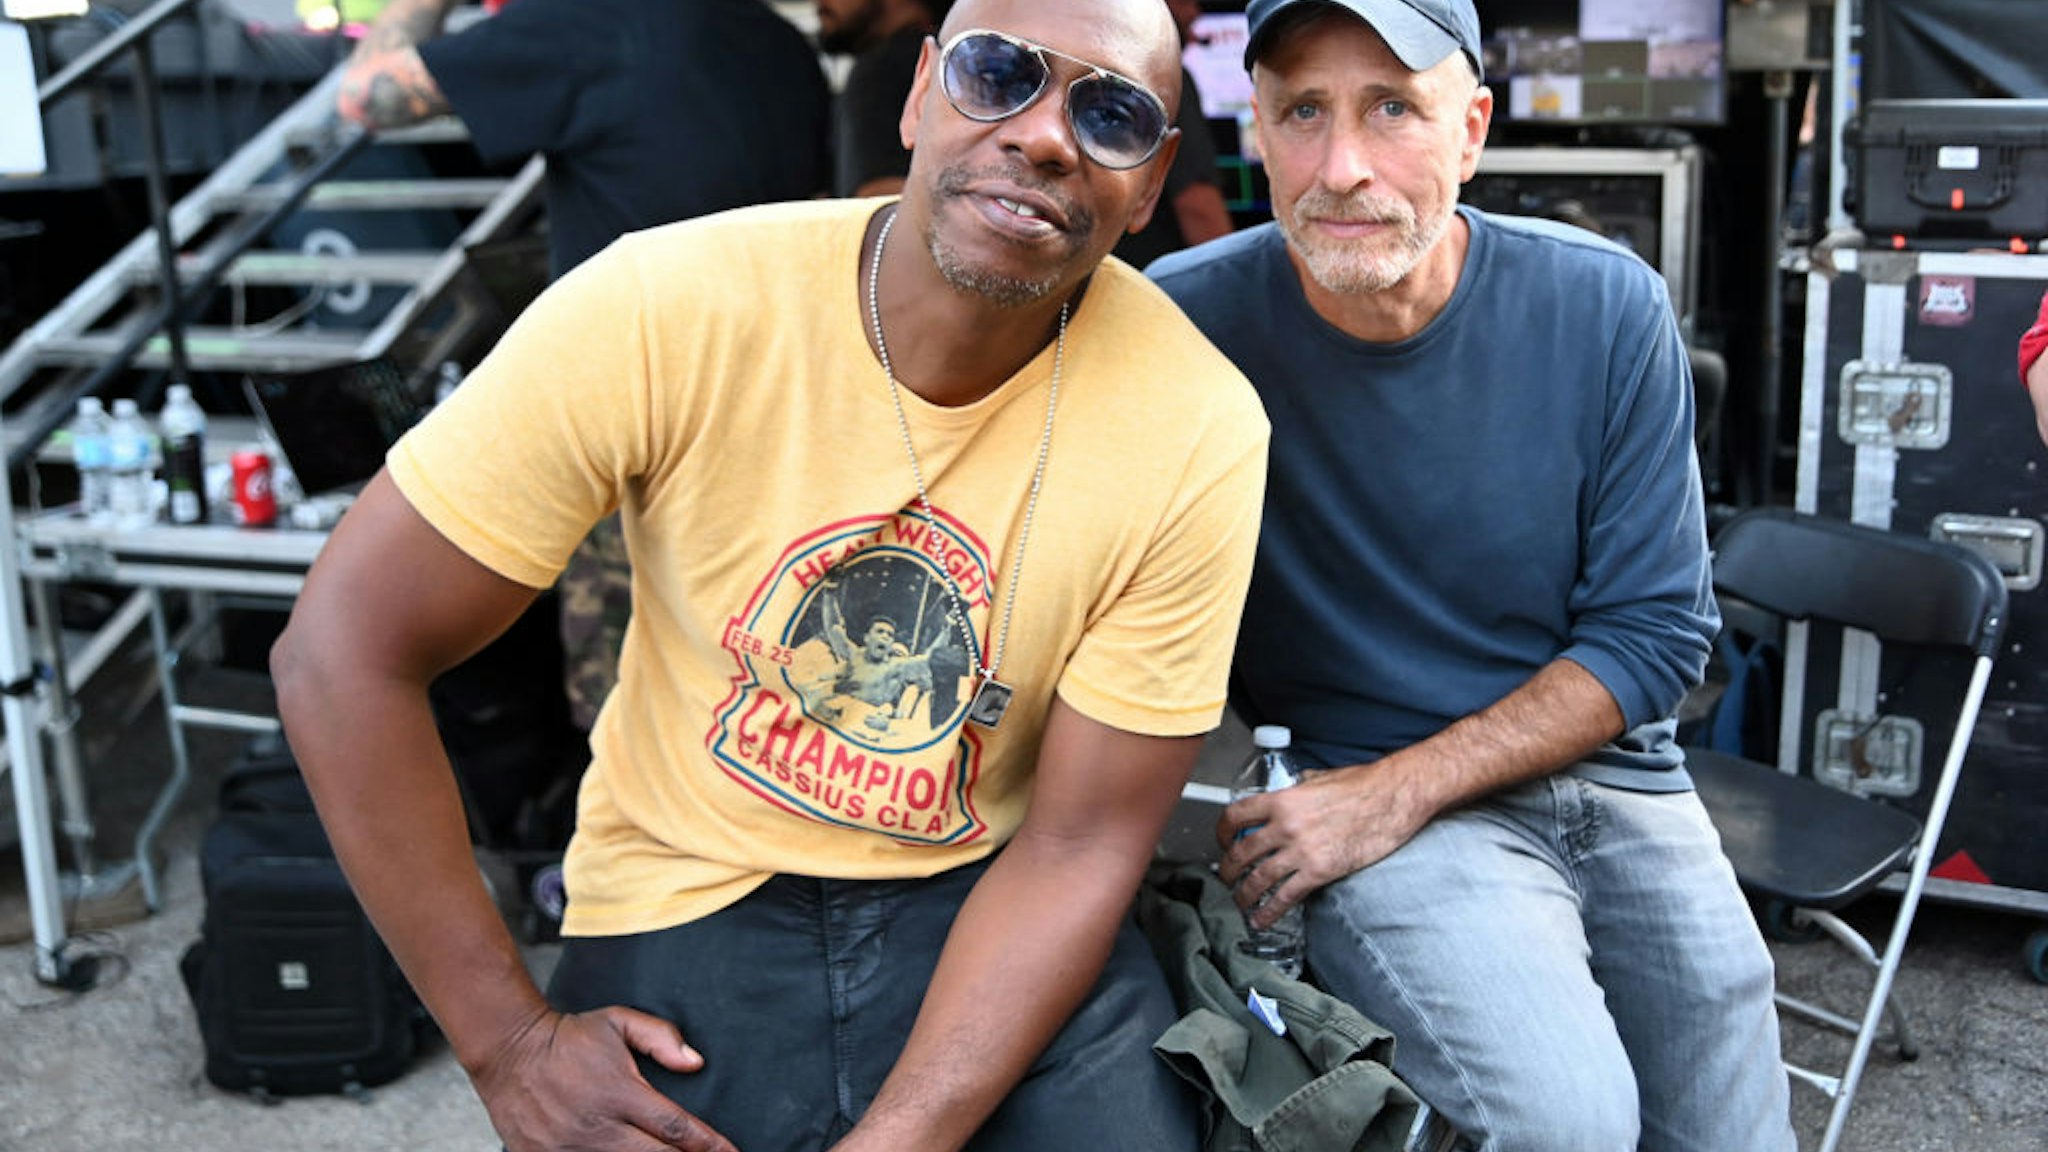 Dave Chappelle and Jon Stewart pose backstage during Dave Chappelle's Block Party on August 25, 2019 in Dayton, Ohio.